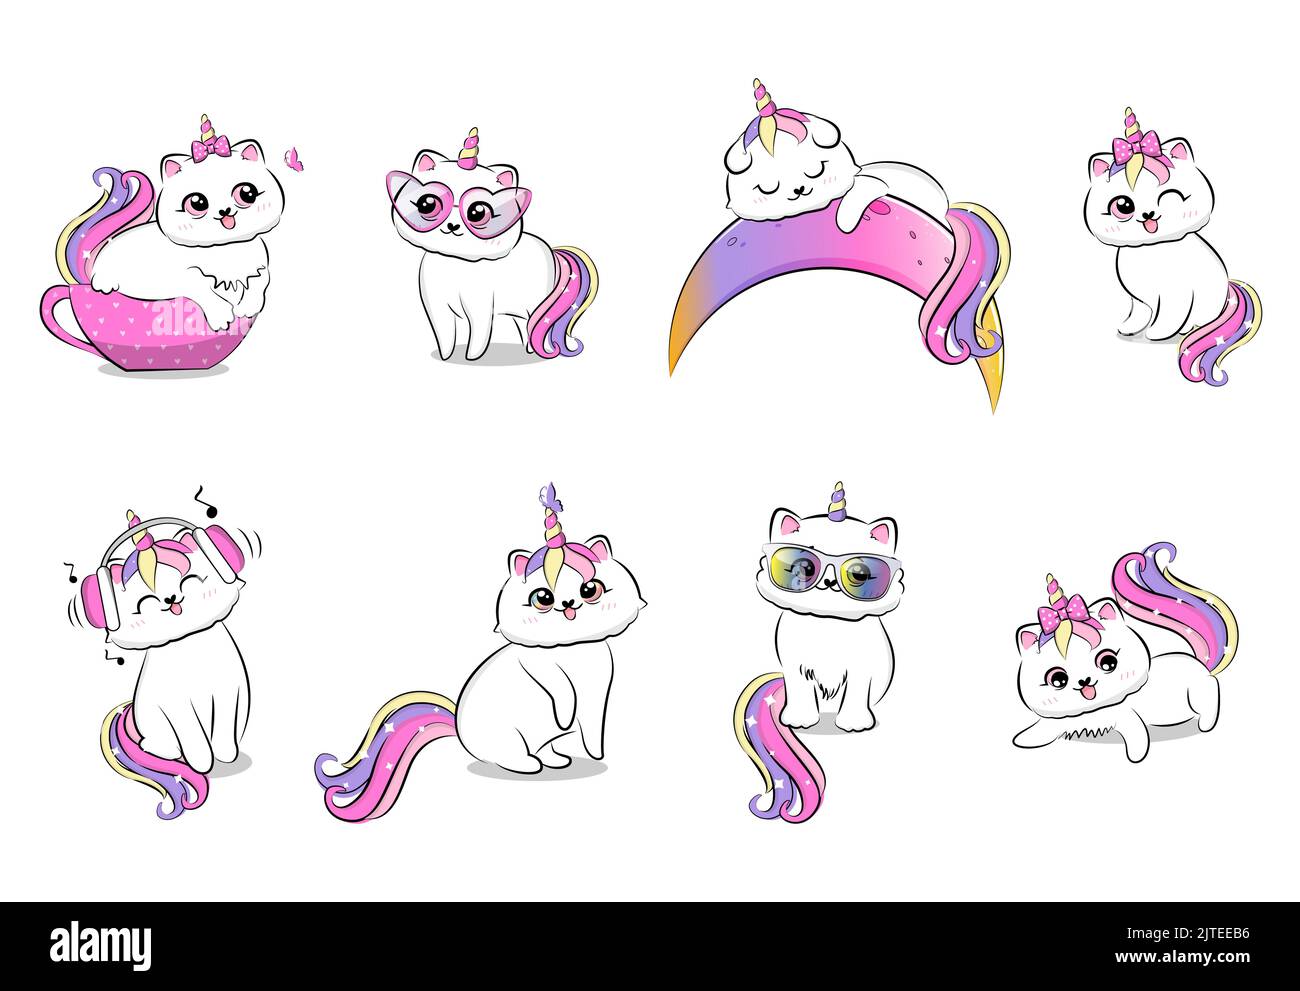 Cute cartoon cats with unicorn horn and tail set. Vector illustration. Stock Vector